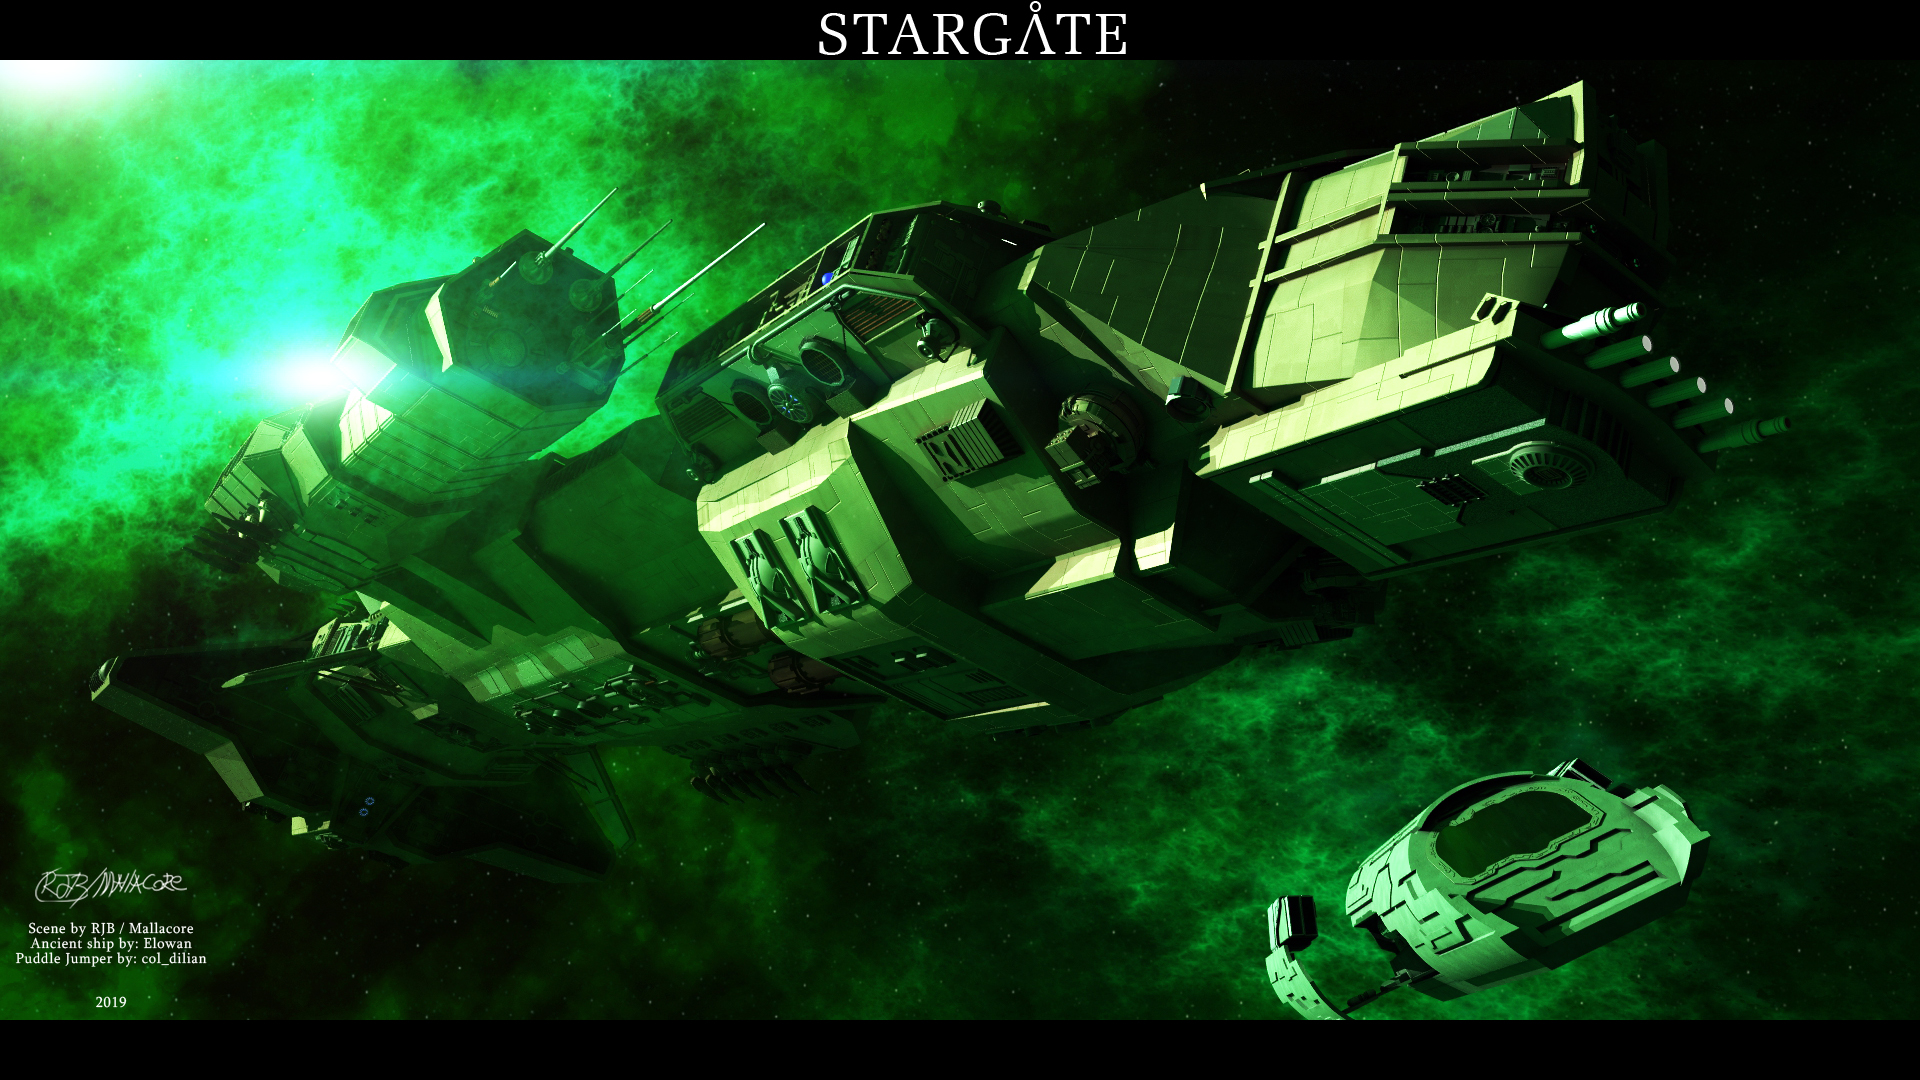 Stargate - Ancients by Mallacore on DeviantArt